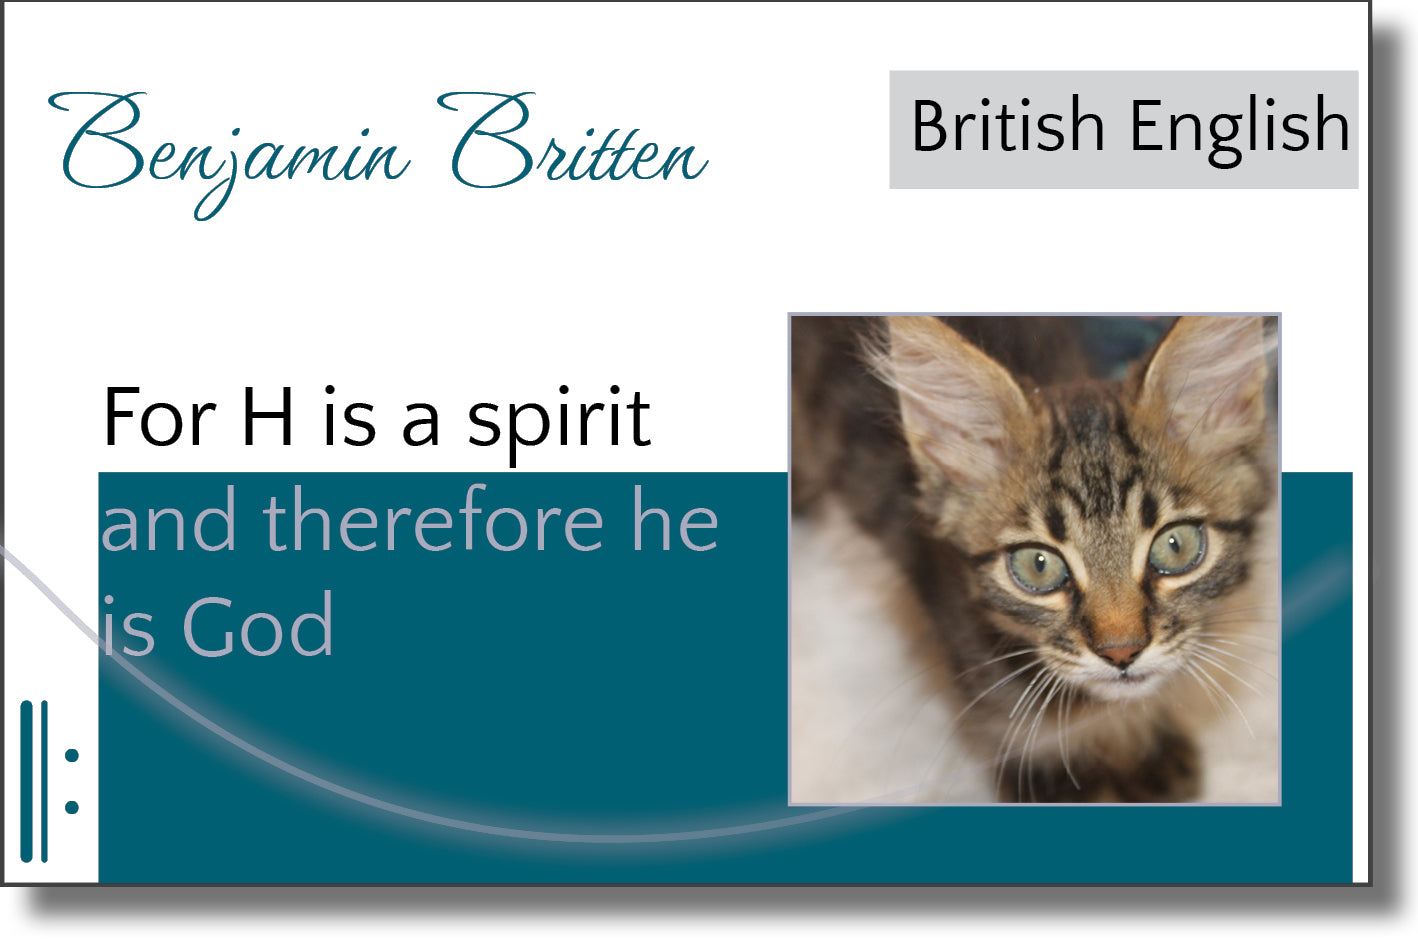 Britten - For H is a spirit and therefore he is God